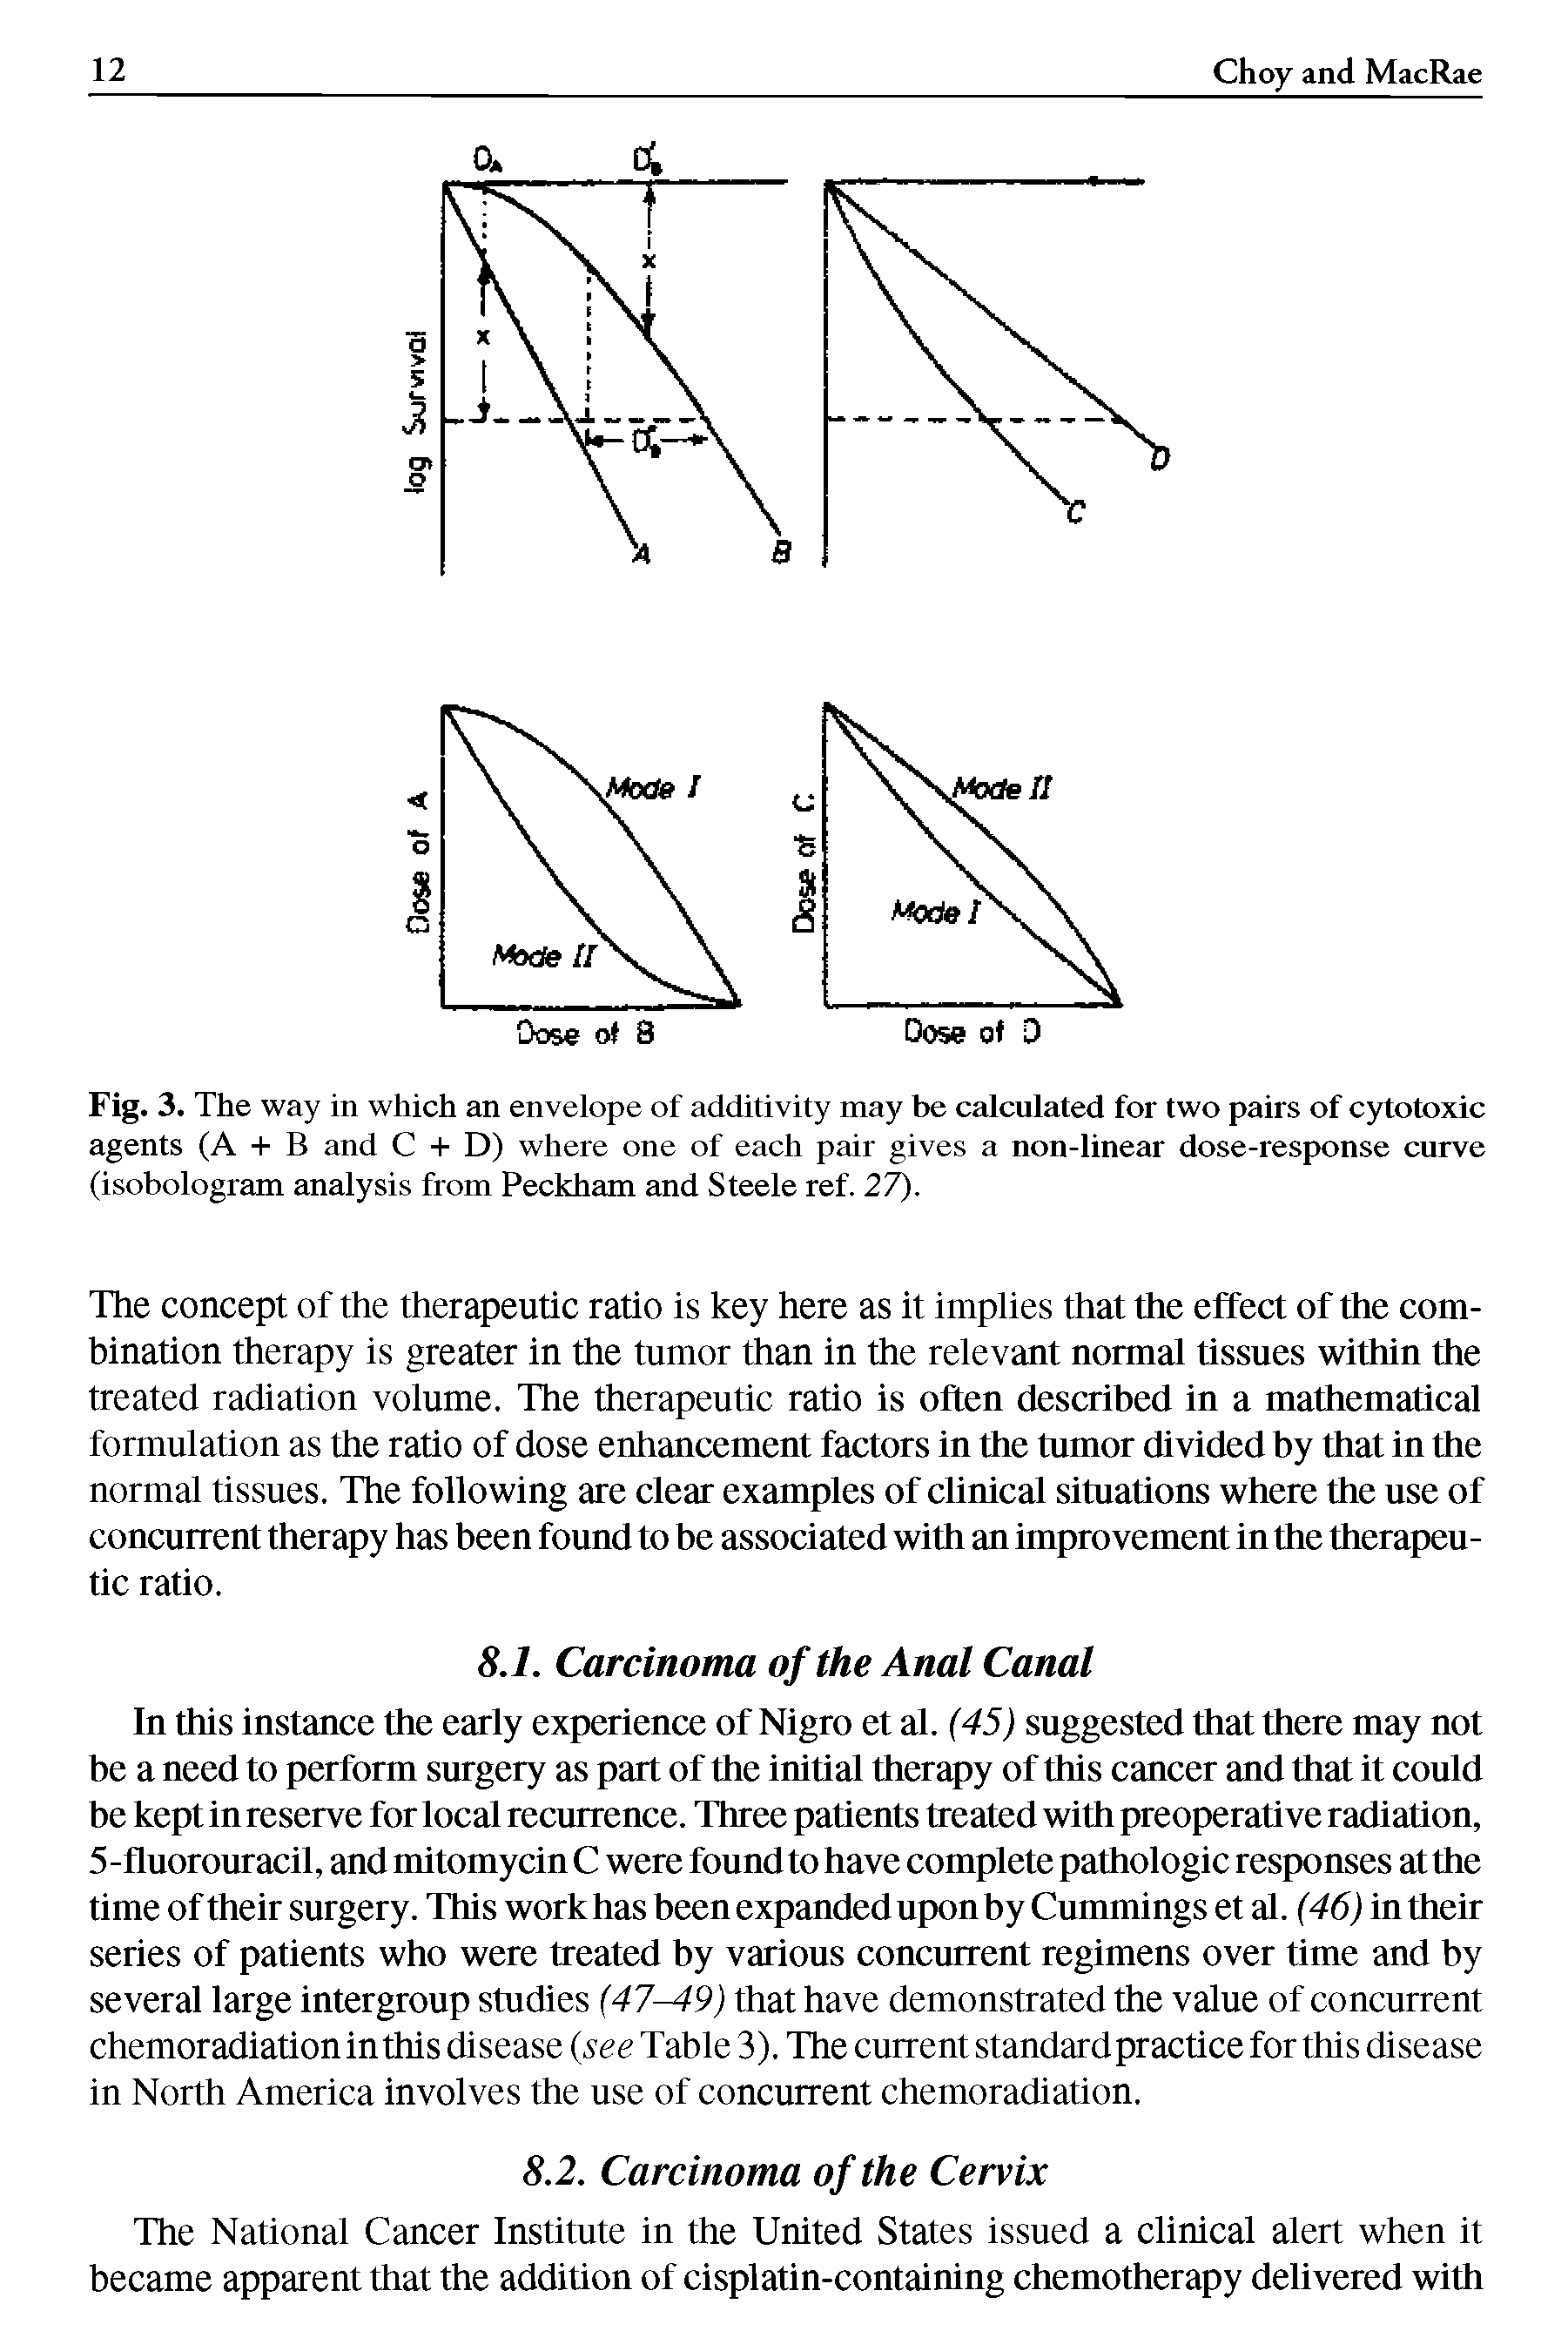 Fig. 3. The way in which an envelope of additivity may be calculated for two pairs of cytotoxic agents (A + B and C + D) where one of each pair gives a non-linear dose-response curve (isobologram analysis from Peckham and Steele ref. 27).